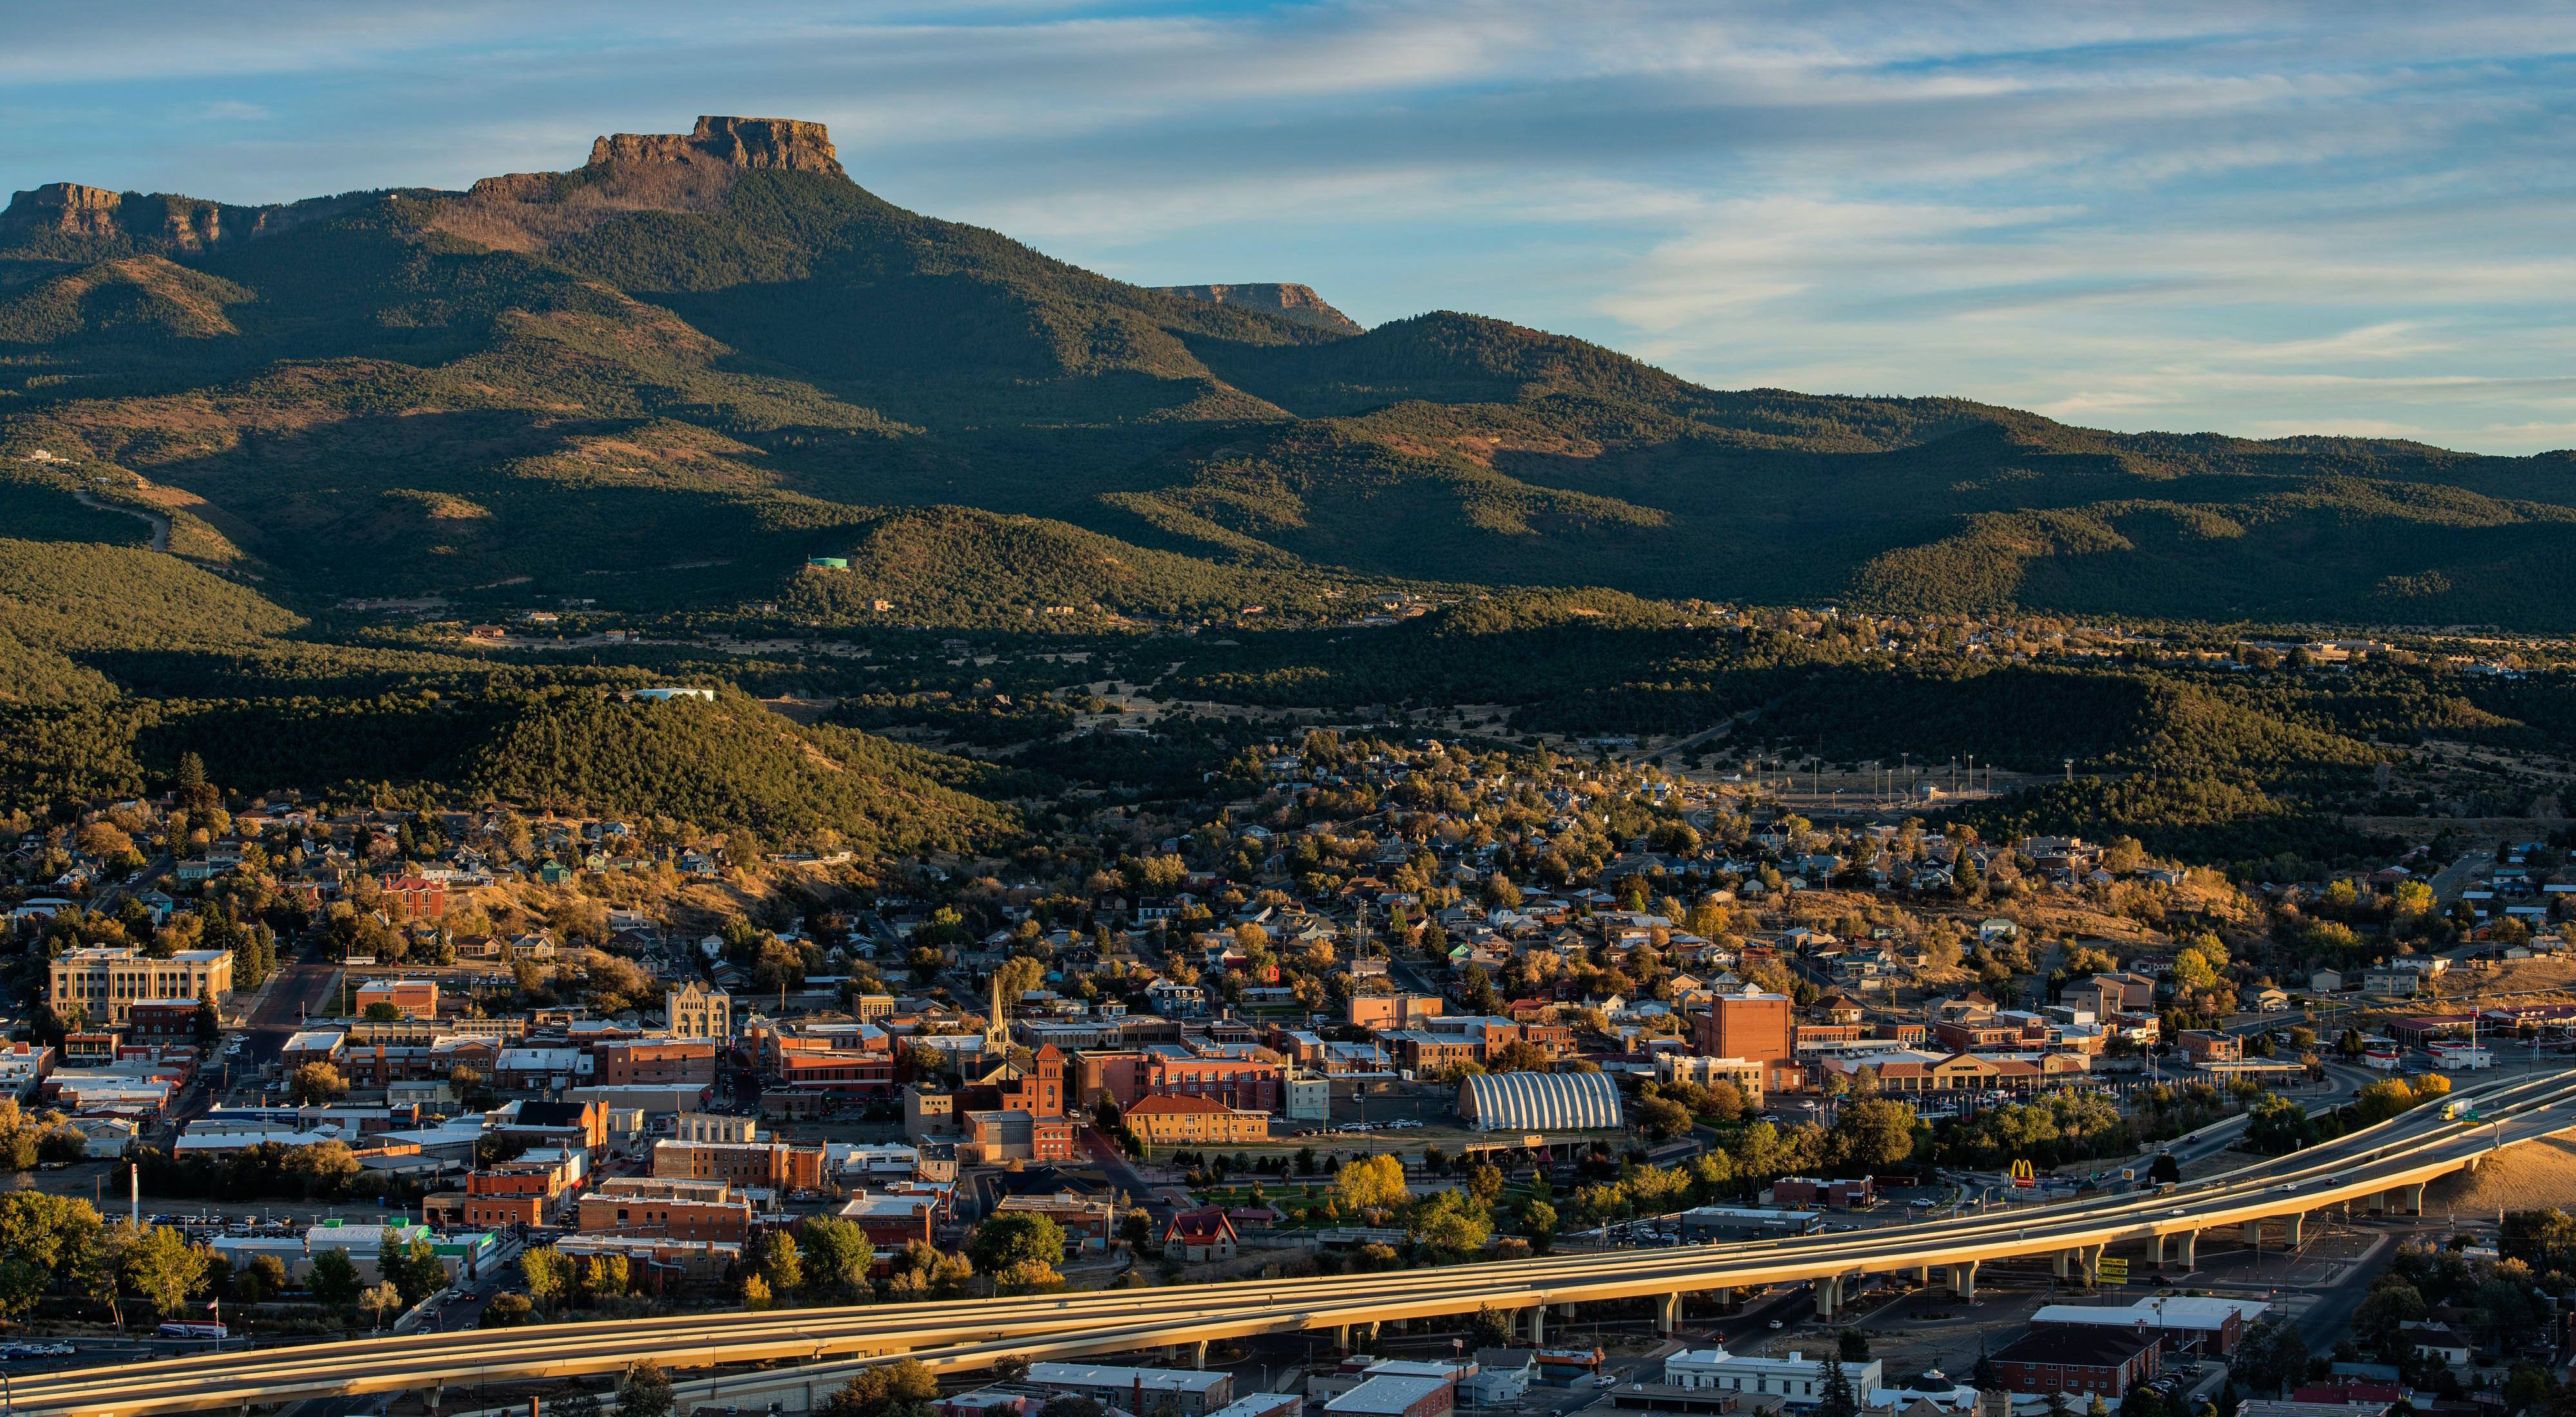 The scenic town of Trinidad, Colorado with Fishers Peak in background